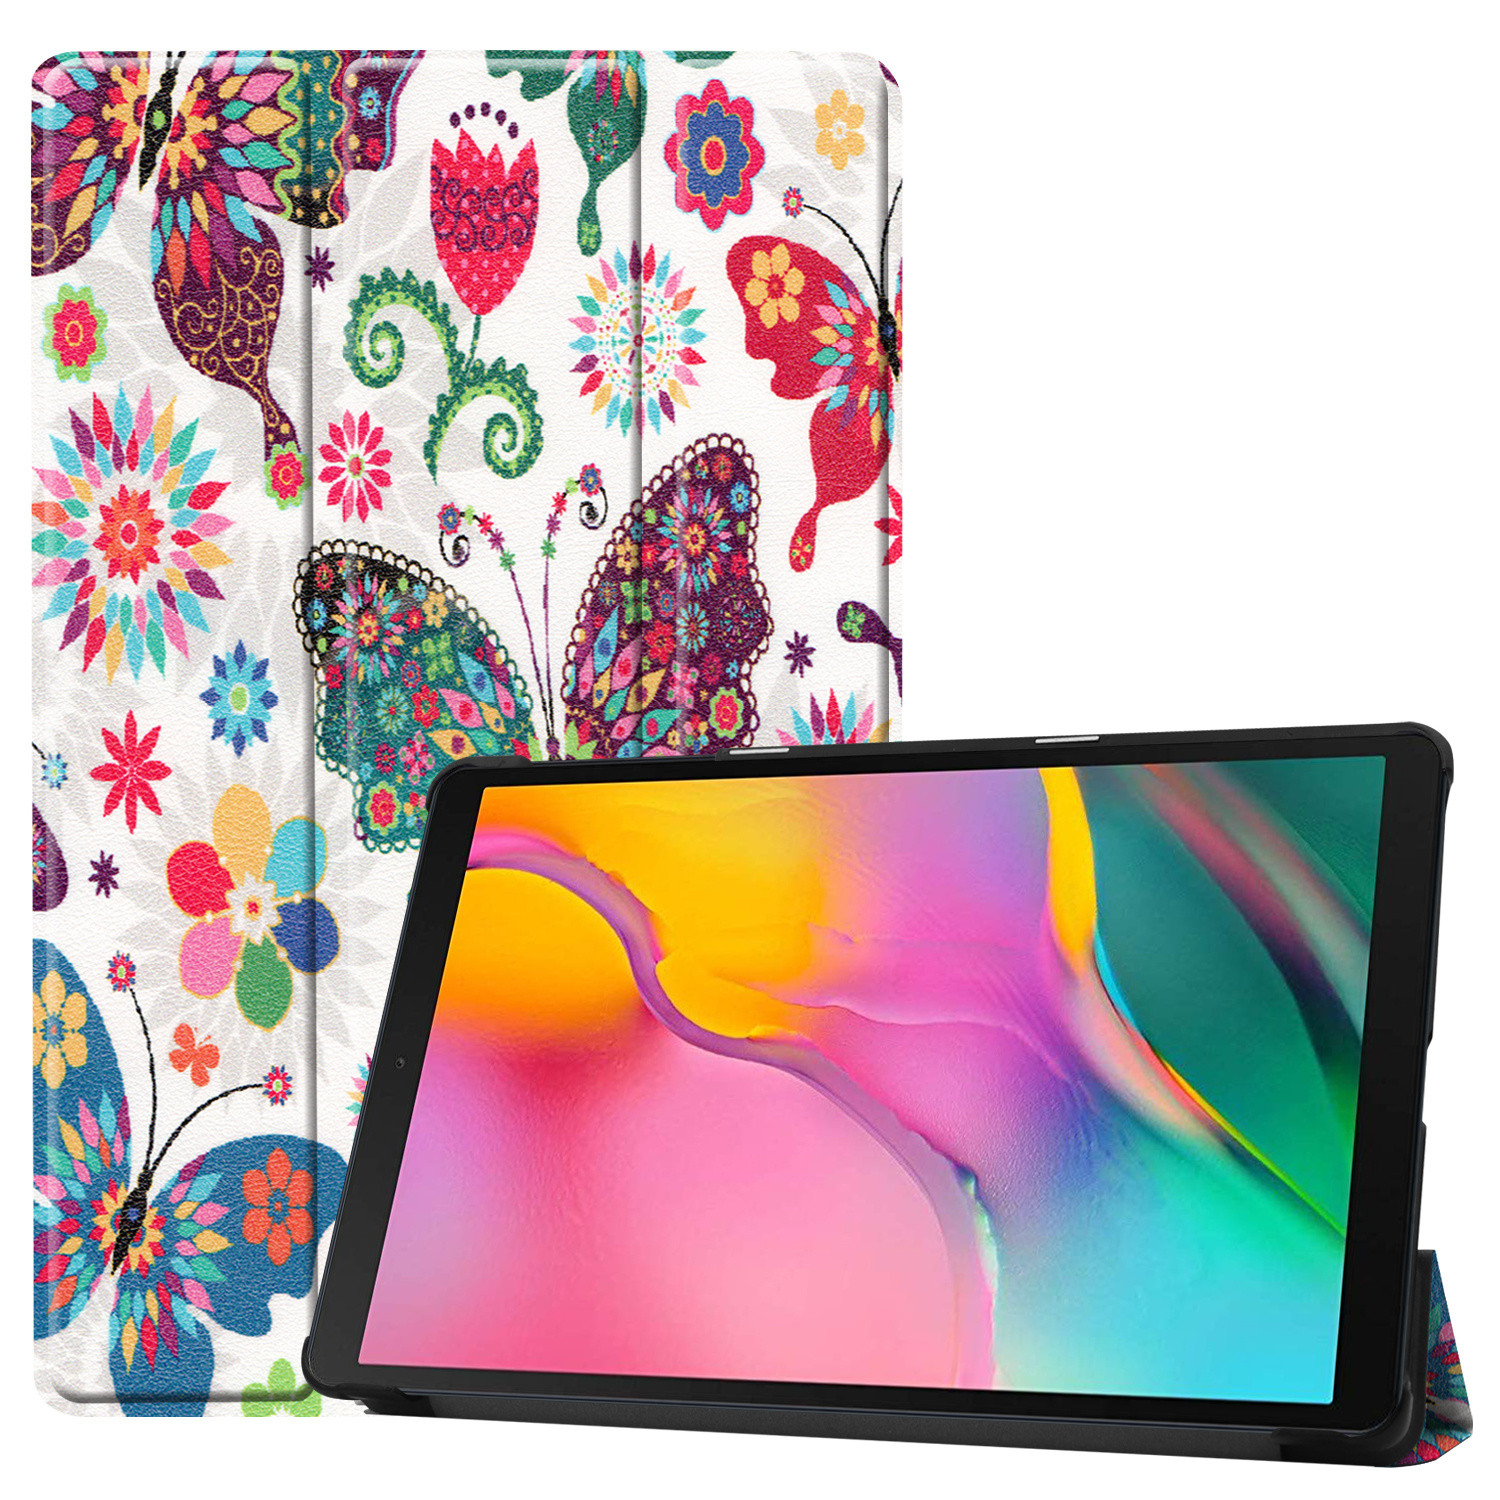 3-Vouw sleepcover hoes - Samsung Galaxy Tab S5e 10.5 inch- Vlinders